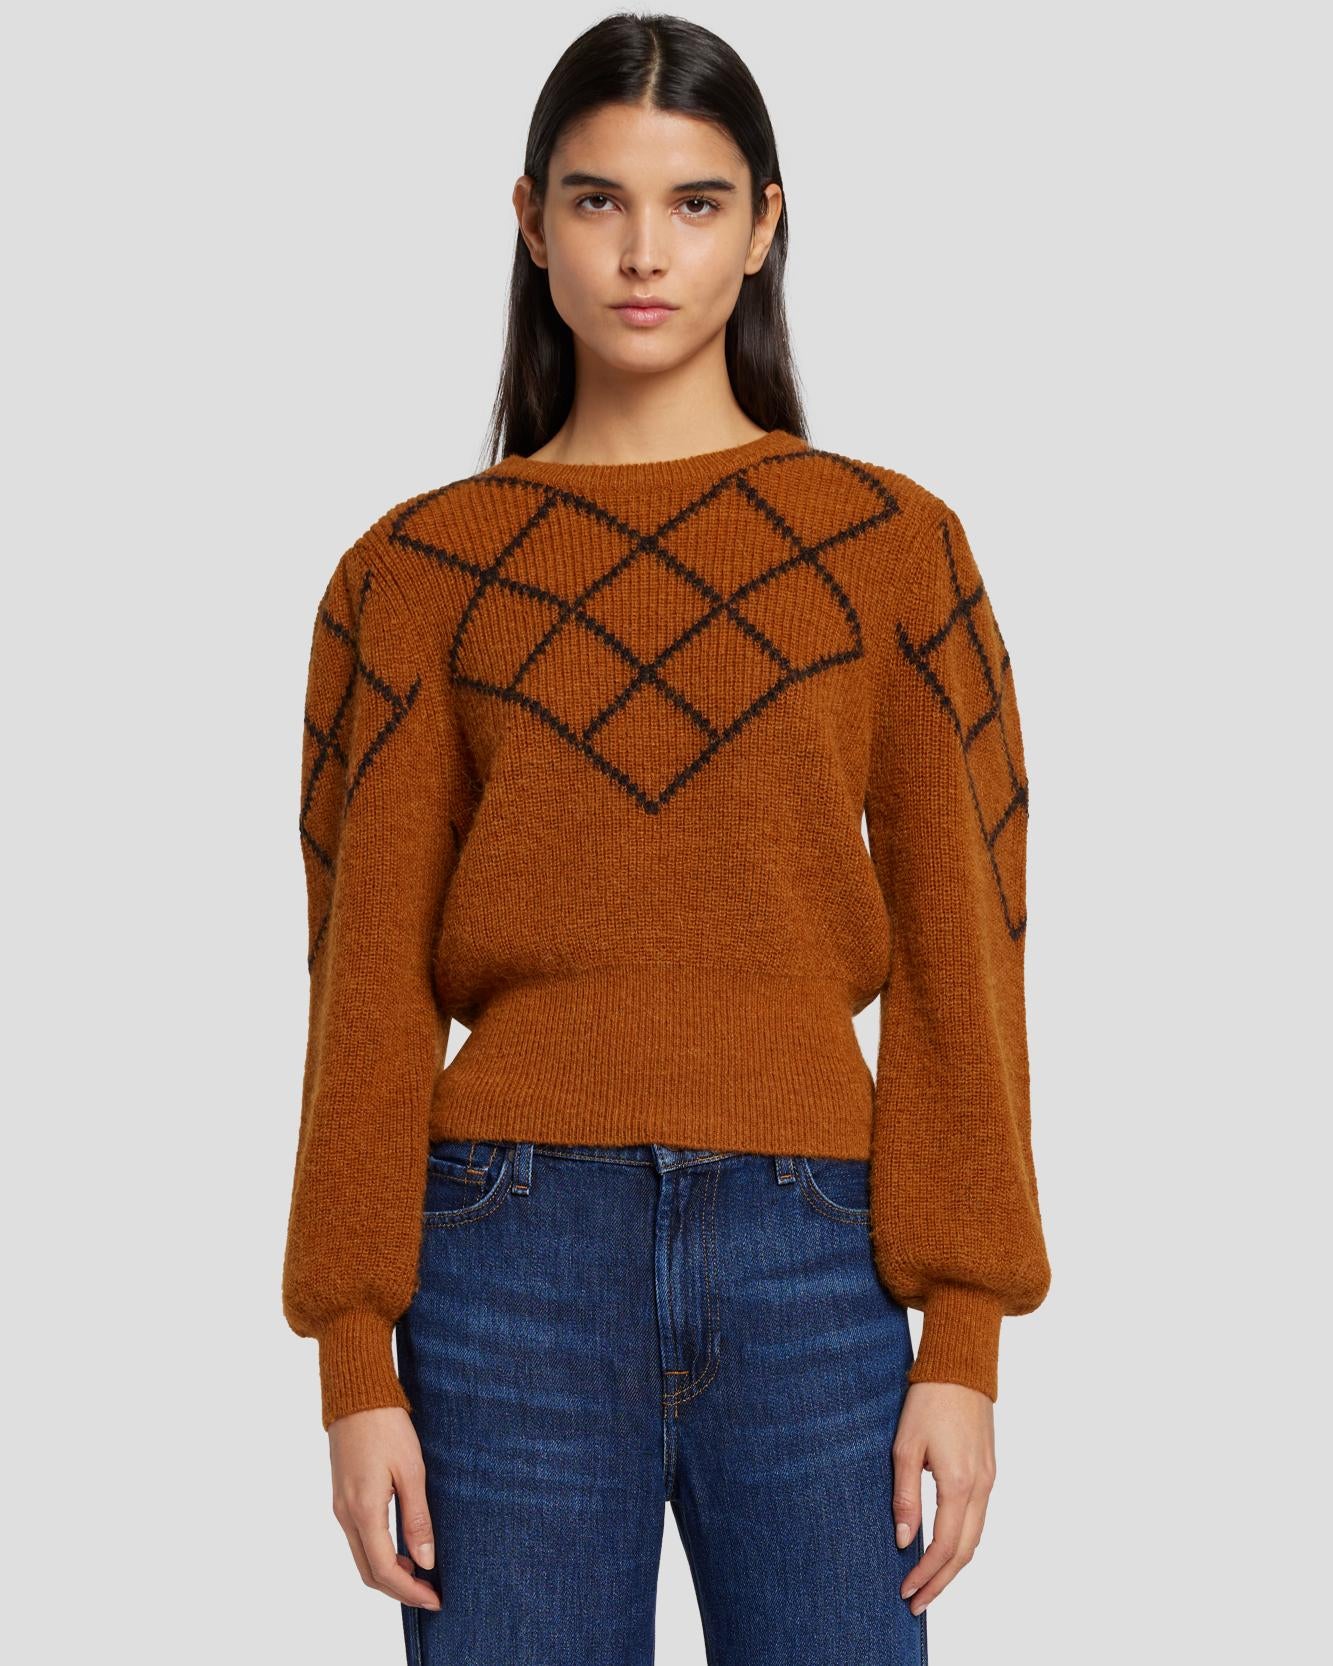 Diamond Sweater in Ginger | 7 For All Mankind